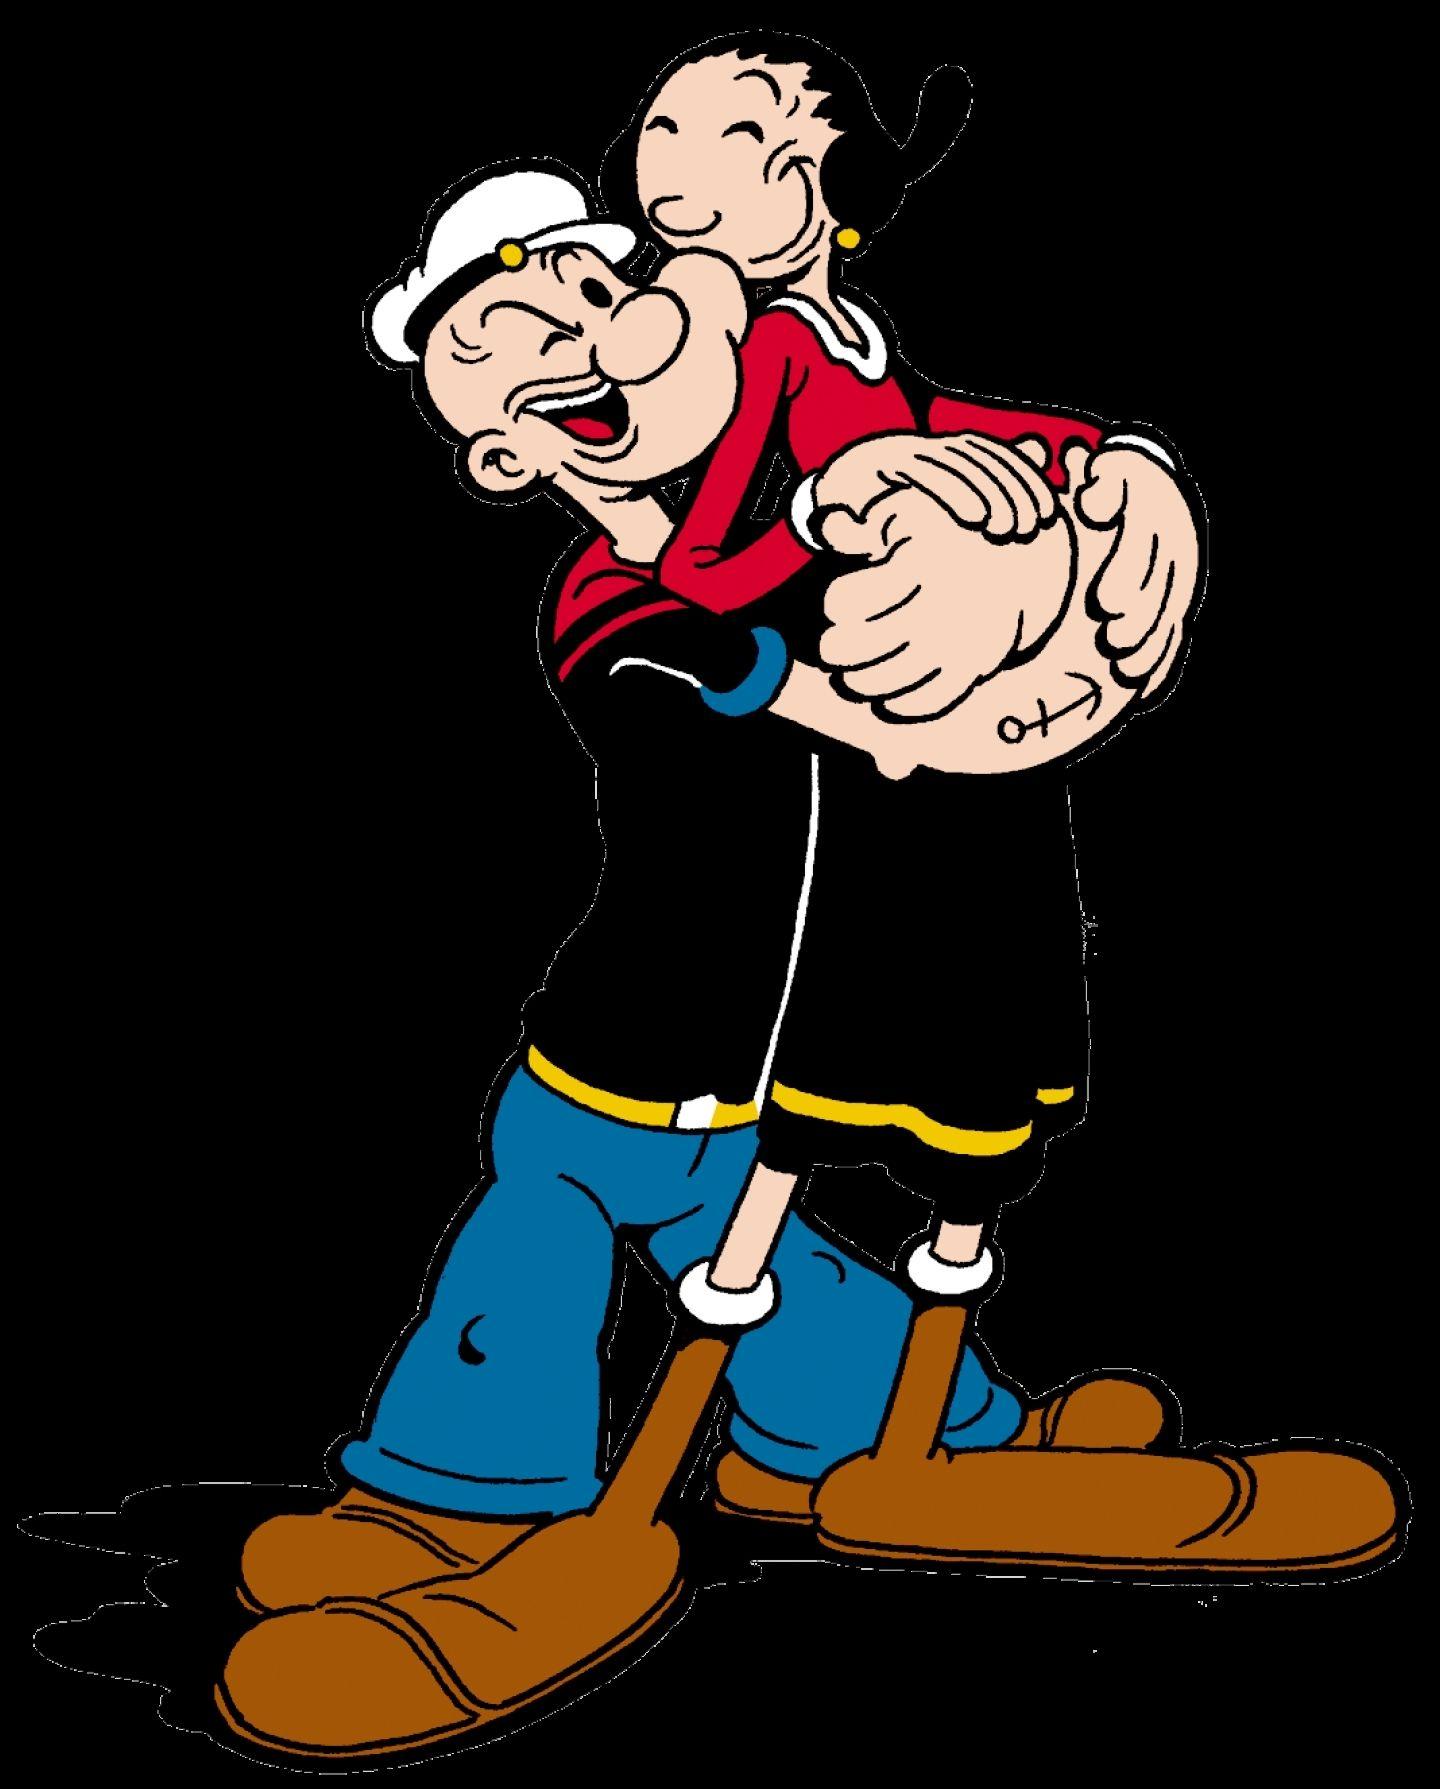 Wallpaper Popeye HD Cartoon With Download Pf Image For Pc Olive